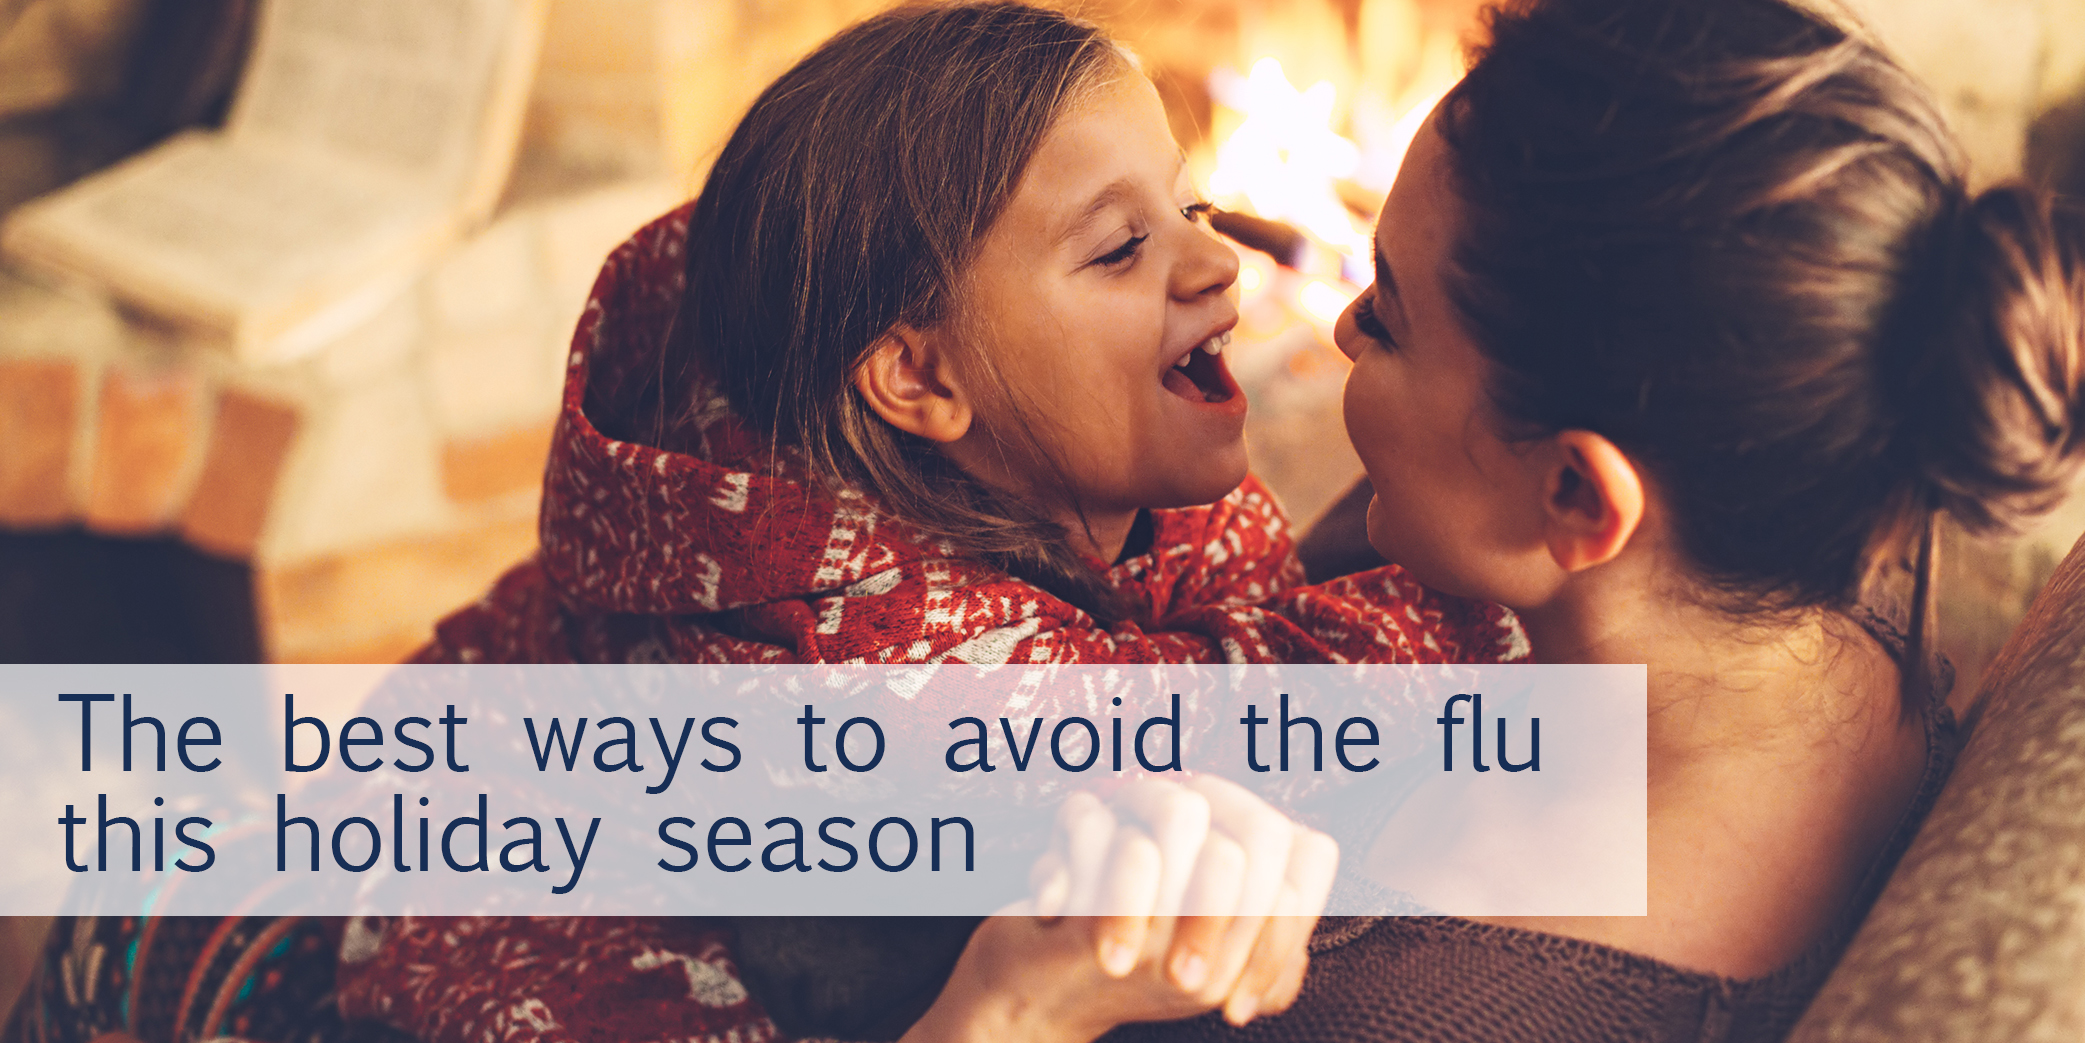 The best ways to avoid the flu this holiday season